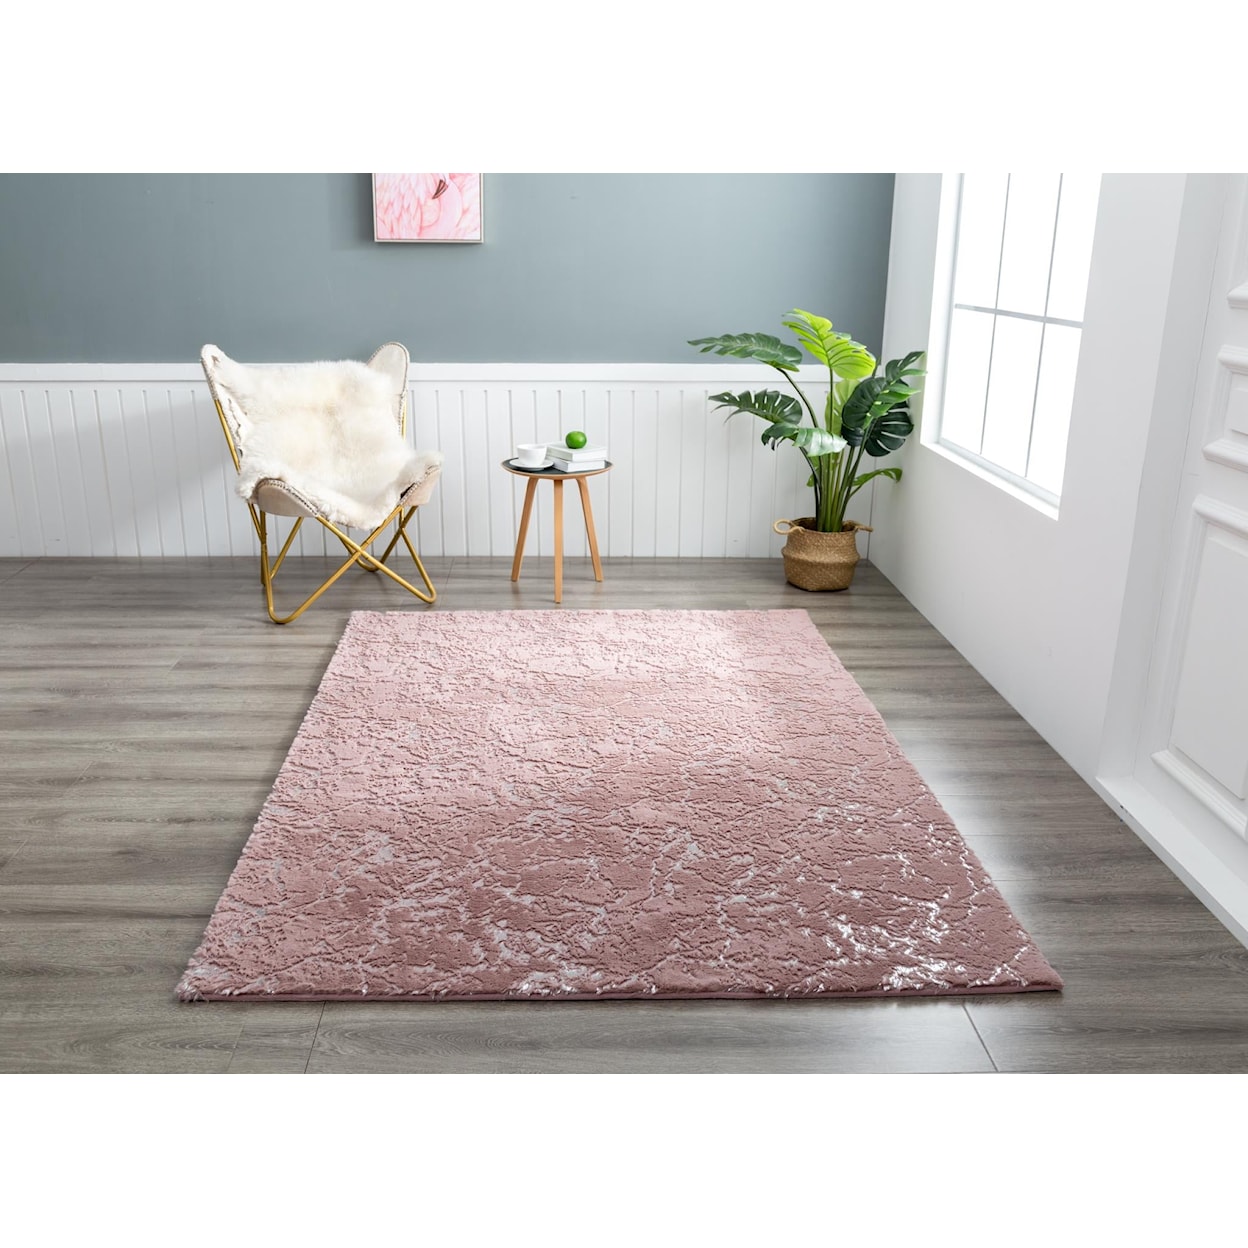 MDA Rugs Chryso Collection CHRYSO 5X7 PINK TEXTURE AREA RUG |